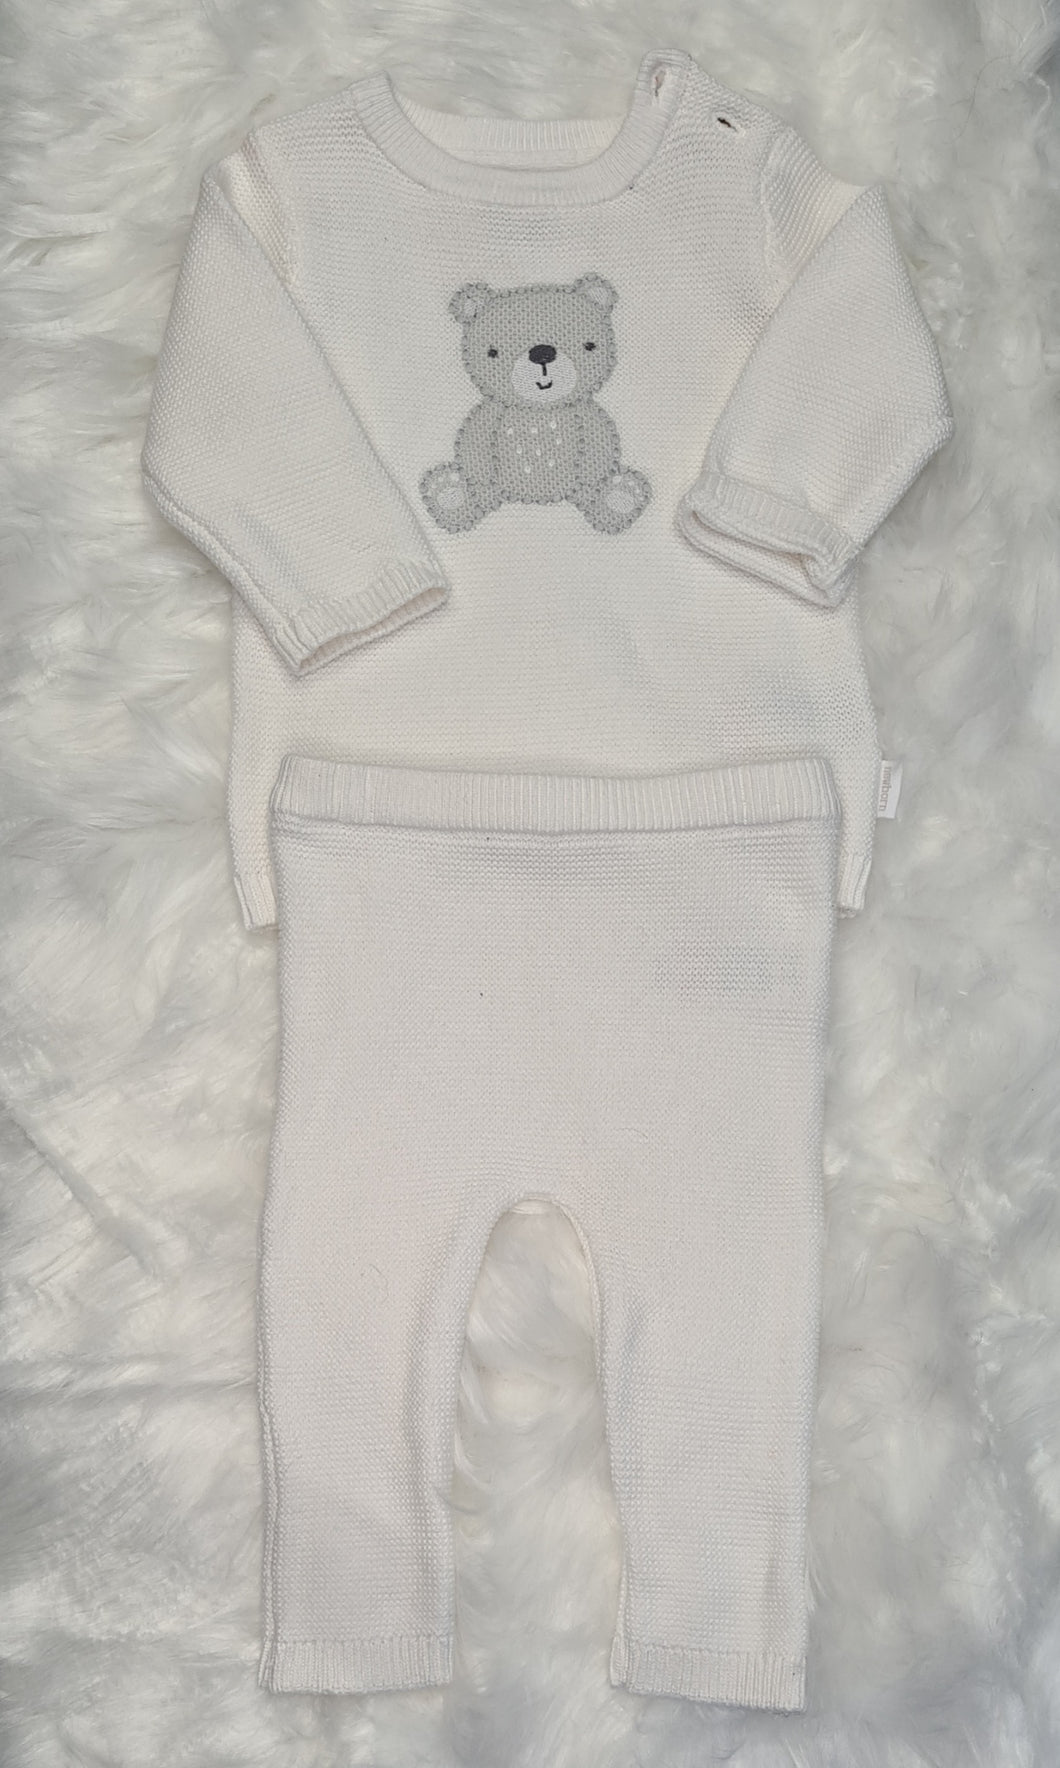 Girls 0-3 Months - White F & F Pram Teddy Set - Jumper and Trousers